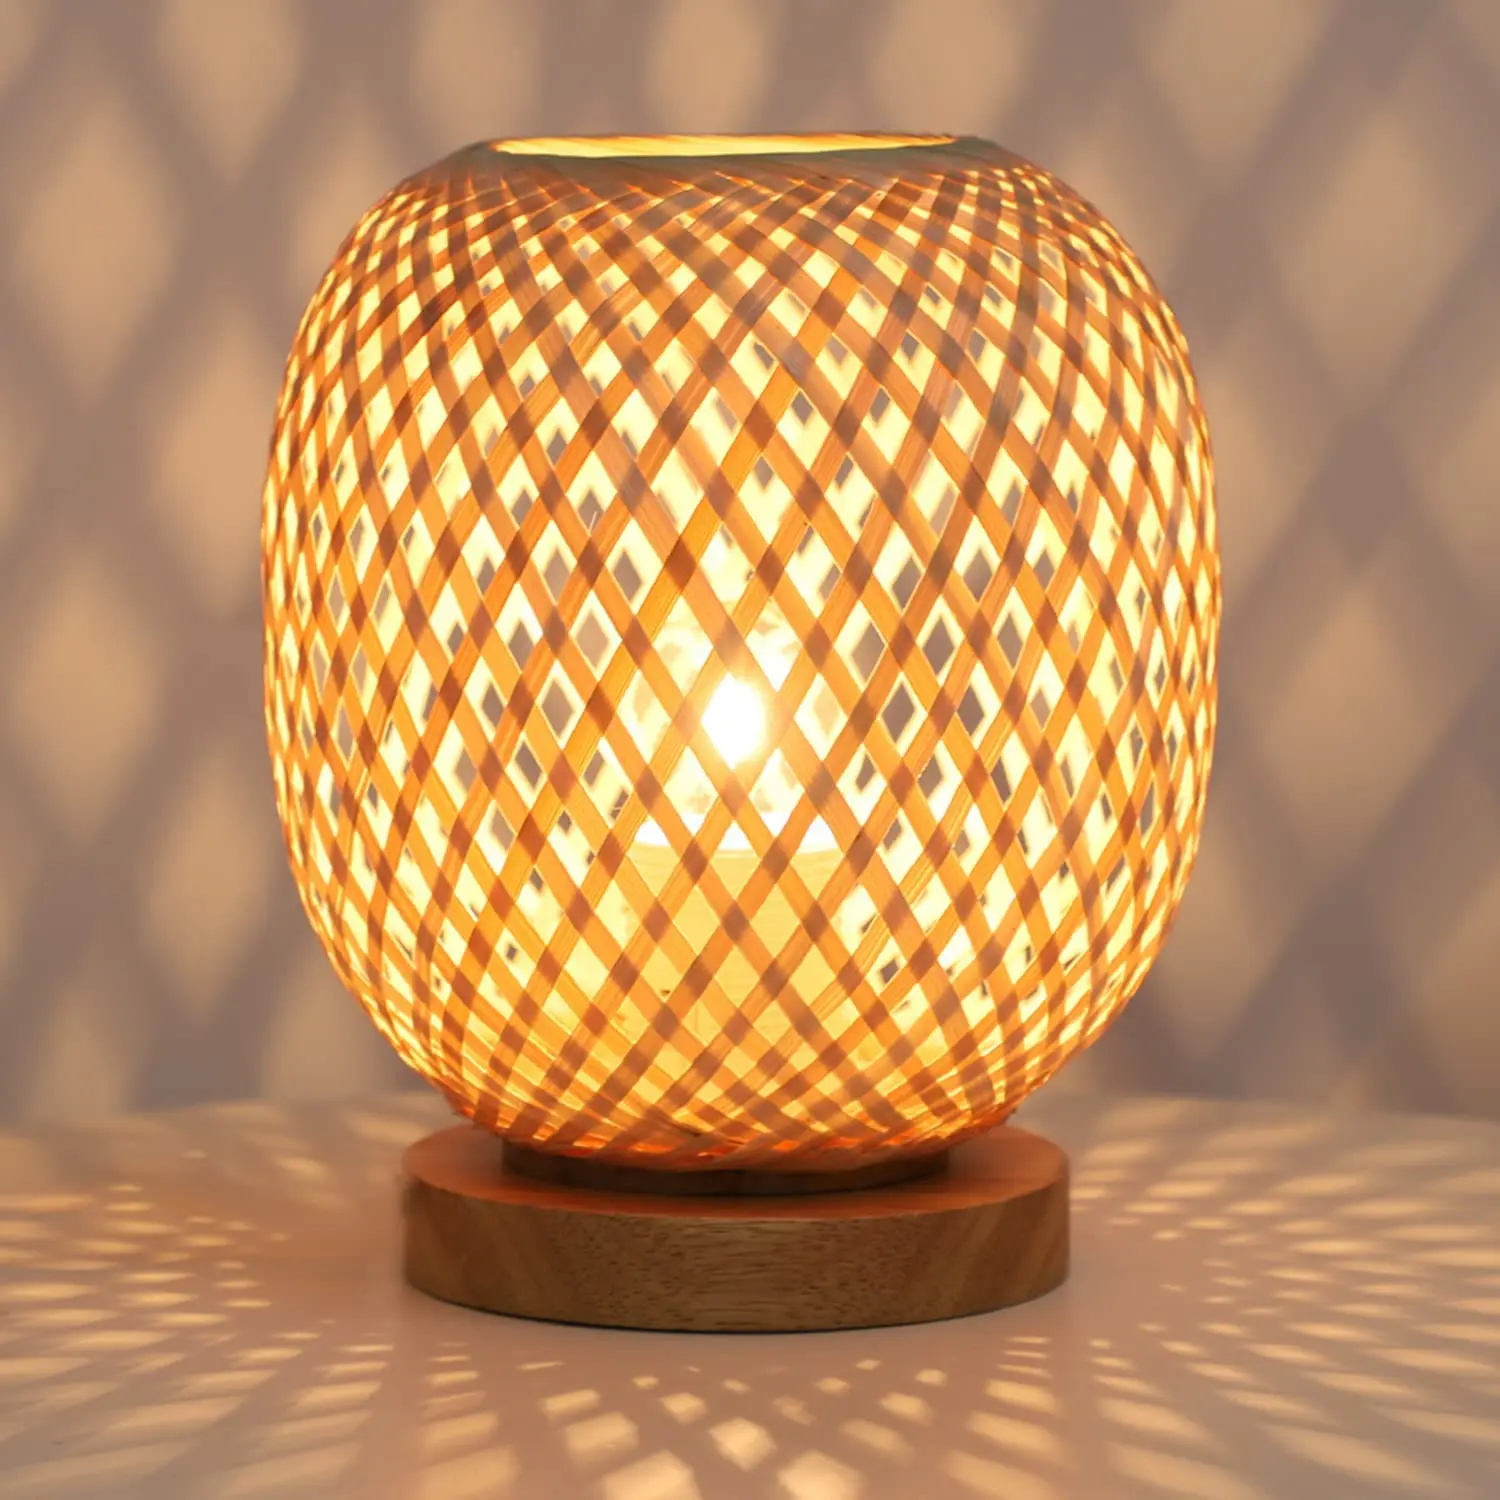 Handmade Dimmable Bamboo Woven Rattan Table Bedside Lamp For Bedroom